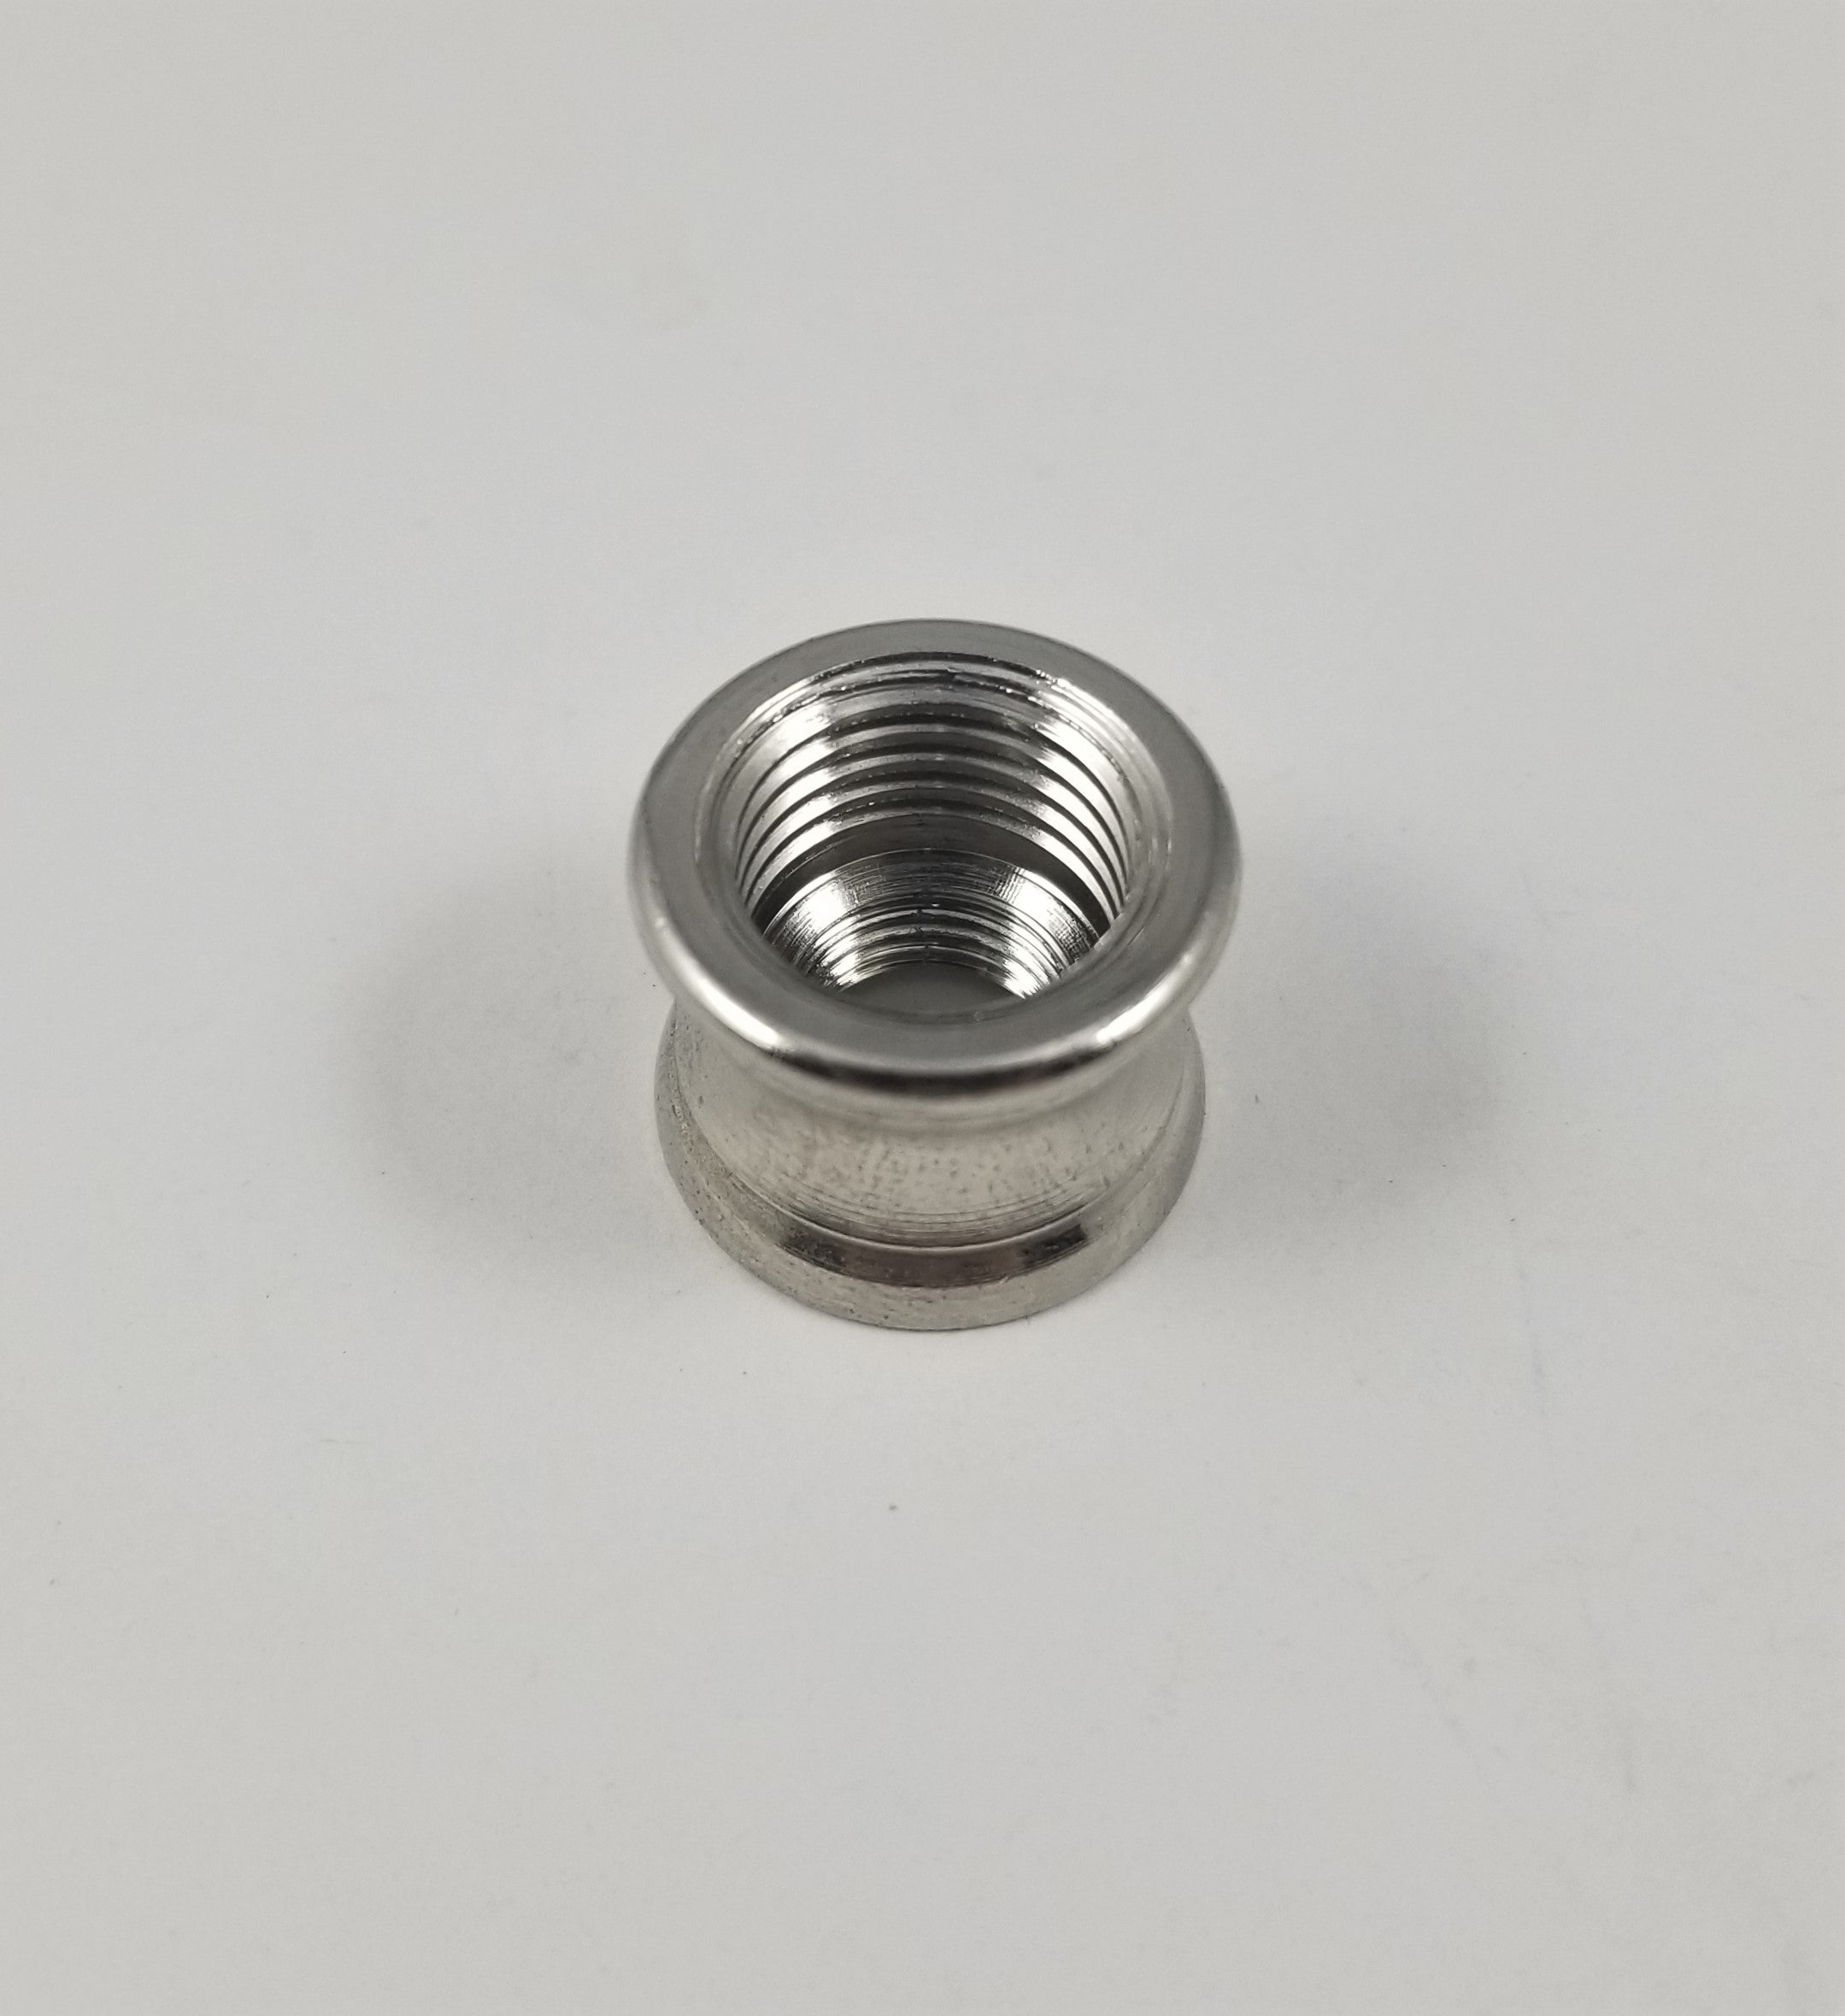 Chrome Plated Coupling - Tapped 1/8 IP F x 1/4 IP F